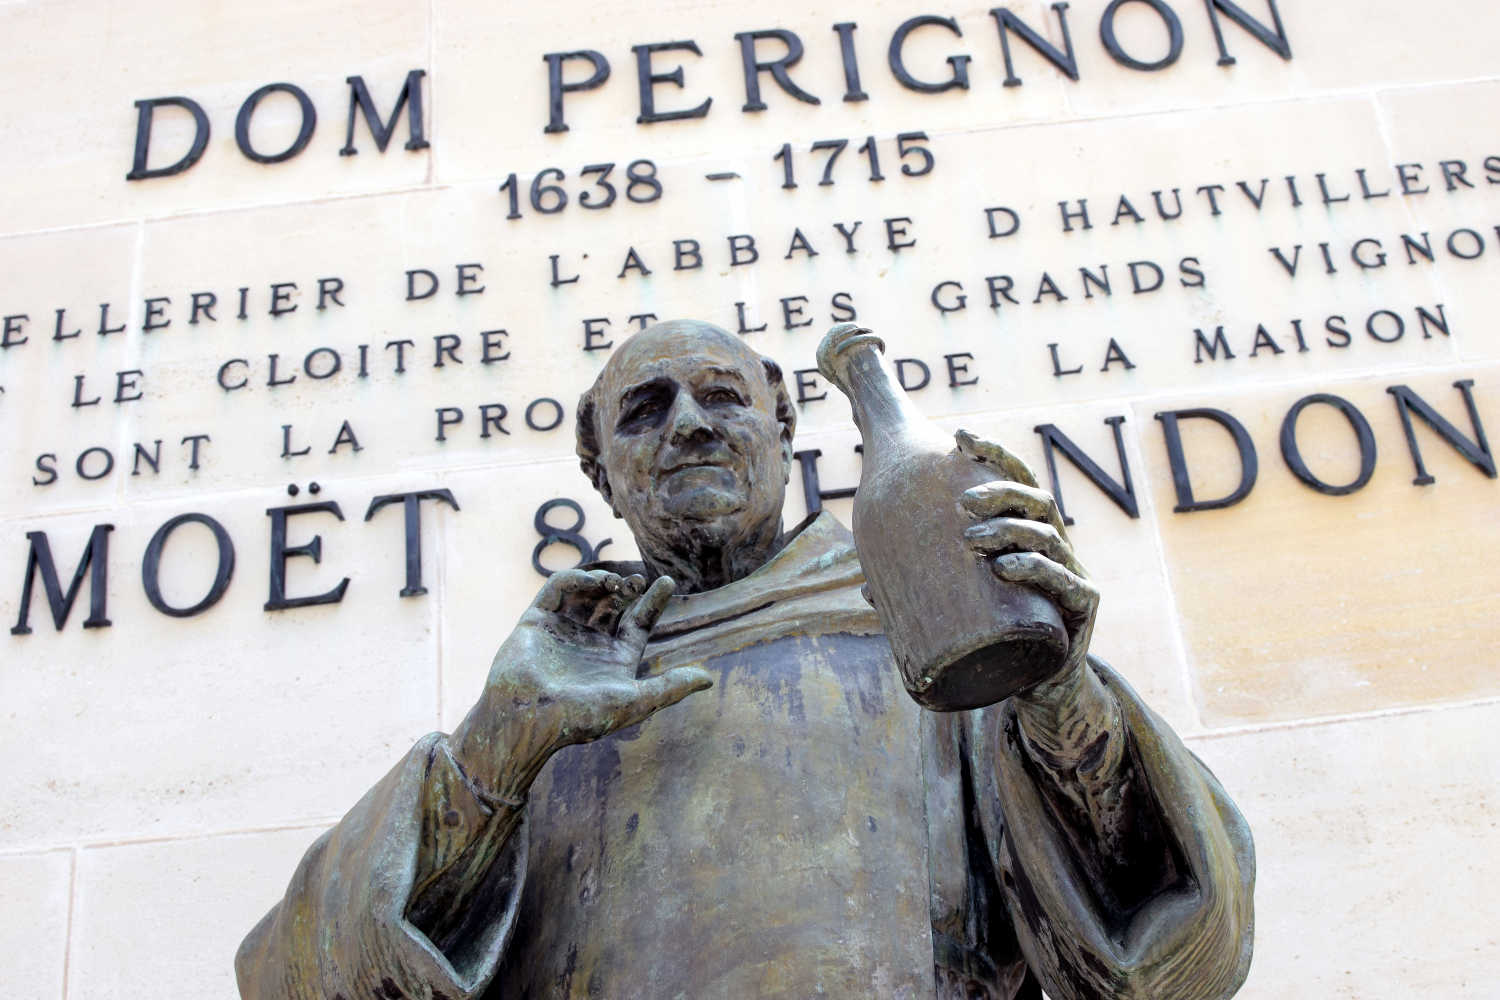 Statue of Dom Perignon at Champagne house Moet & Chandon